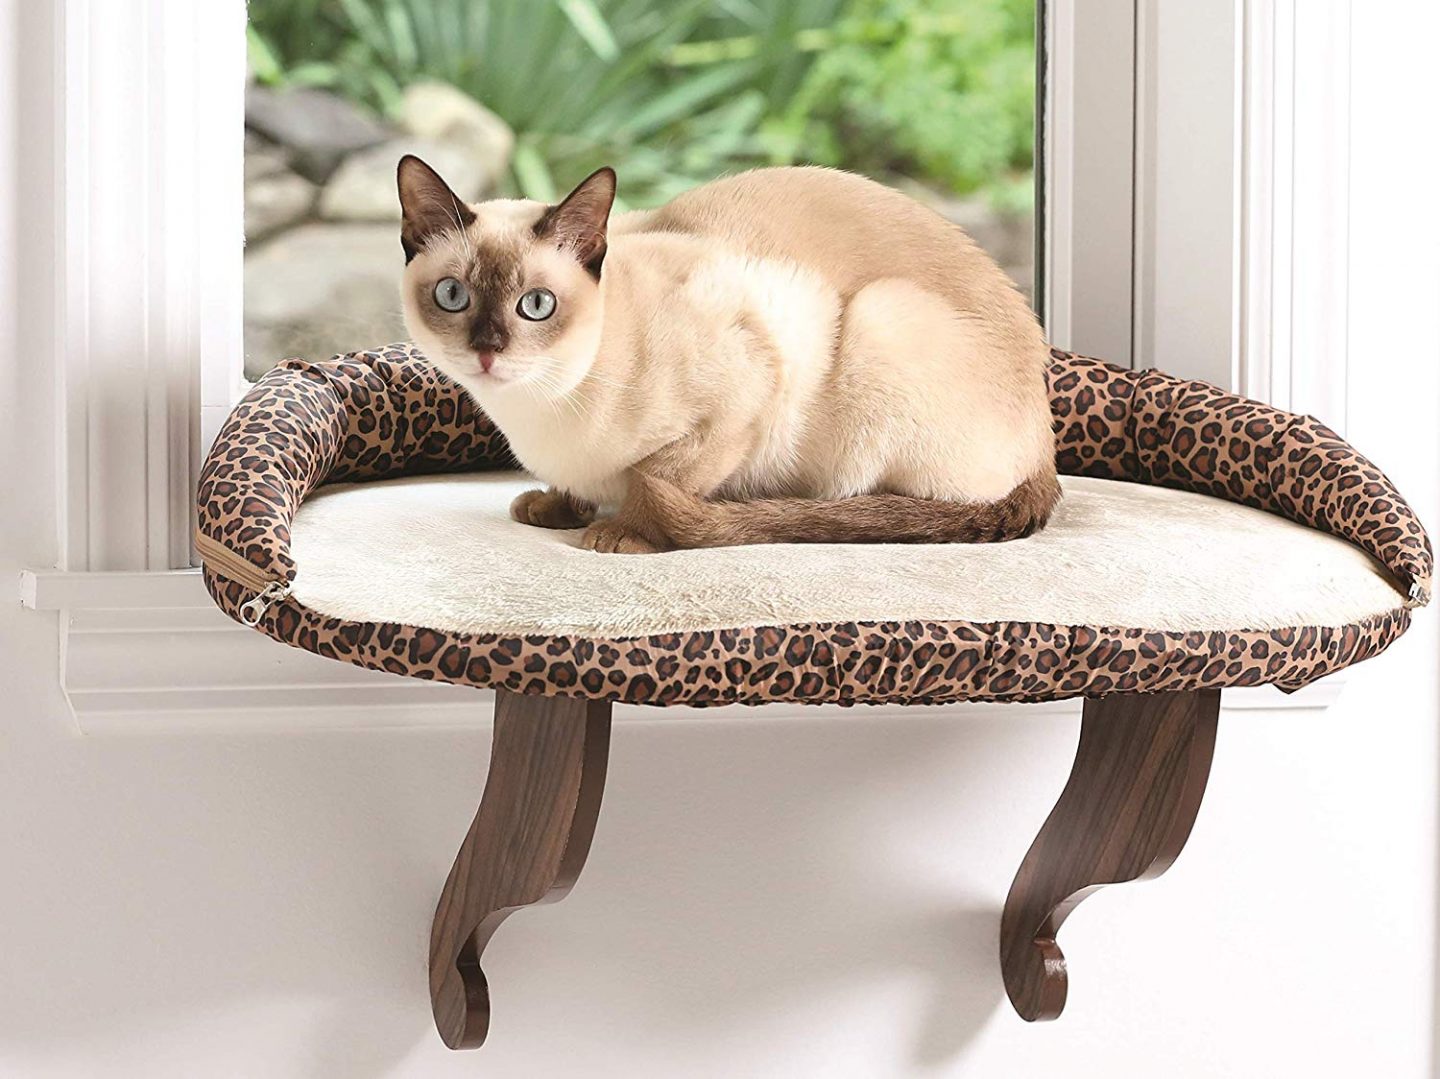 Leopard print window mounted cat bed.  'Nuff said.